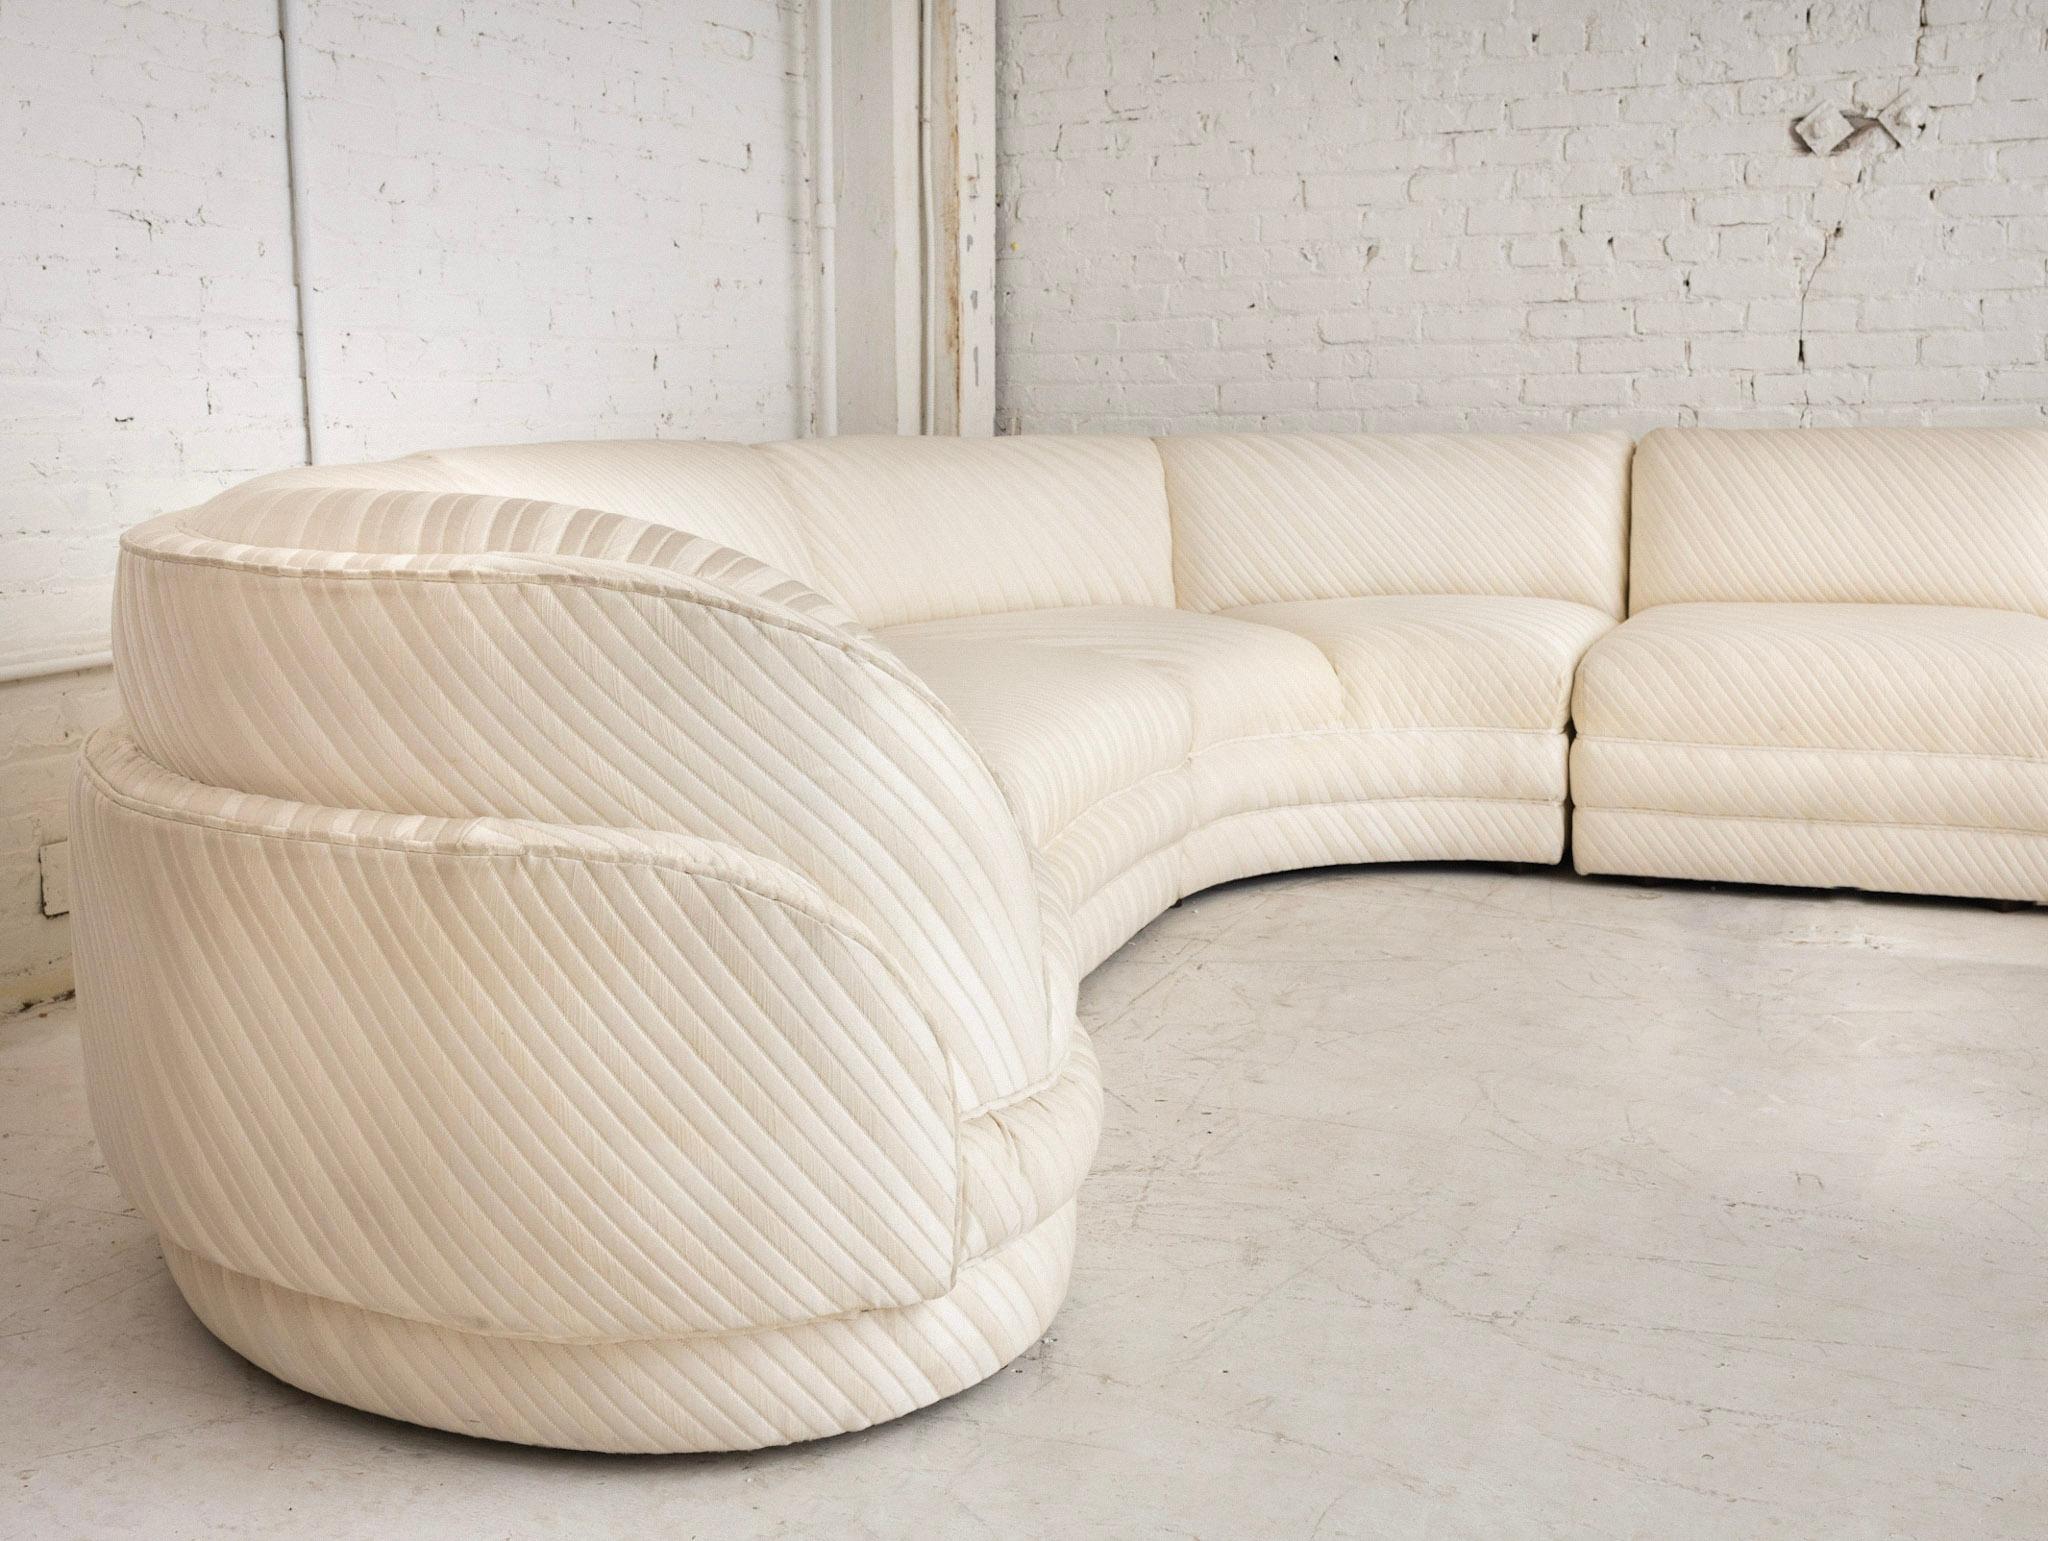 North American Cloud Form Post Modern 5 Piece Sectional in Cream Jacquard Stripe Upholstery